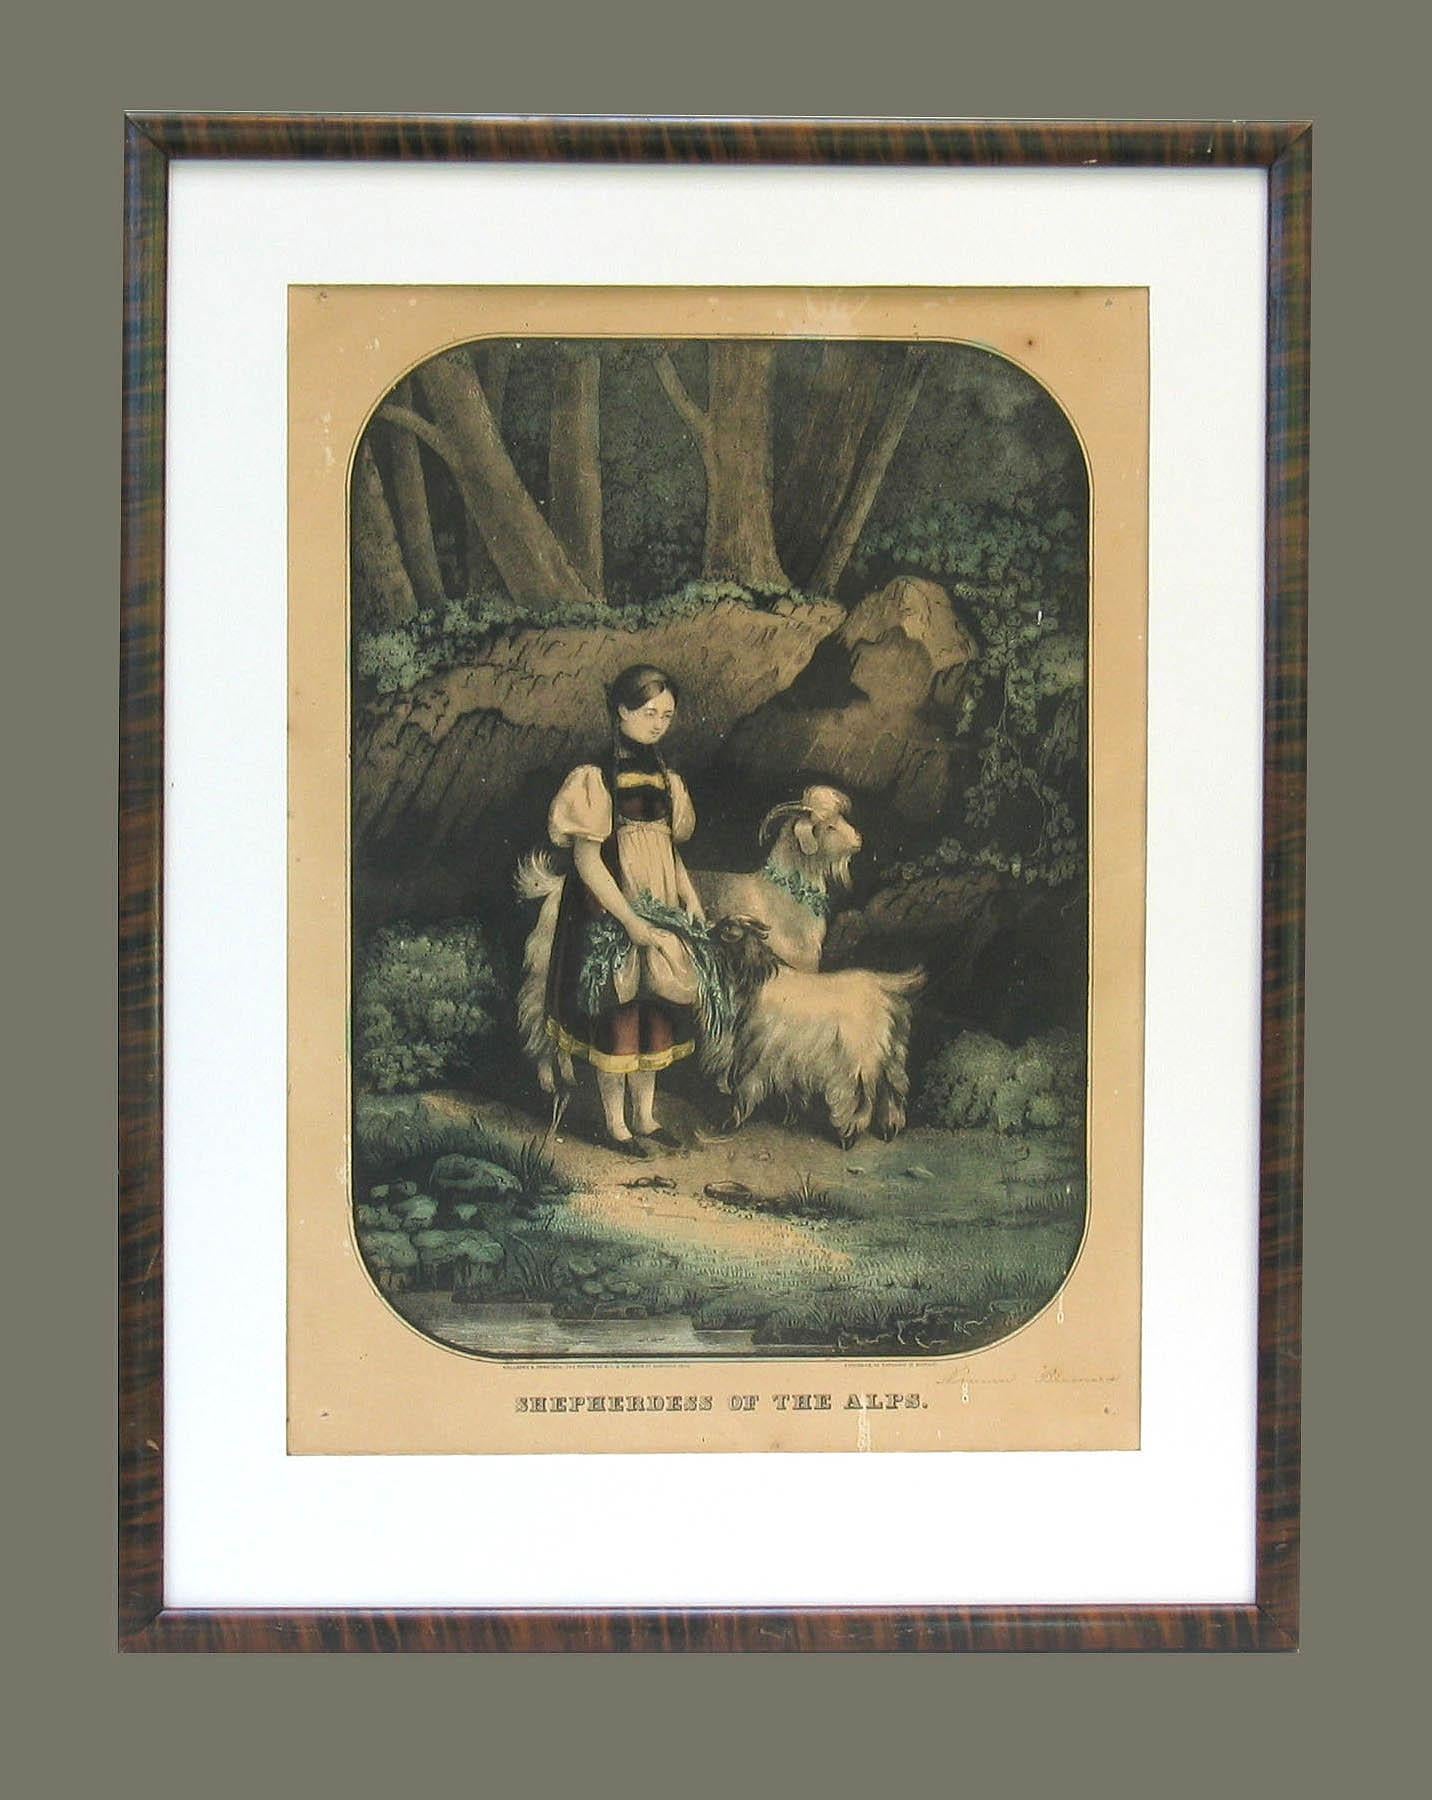 Paper Original Kellogg & Comstock Hand-Colored Lithograph 'Shepherdess of the Alps' For Sale